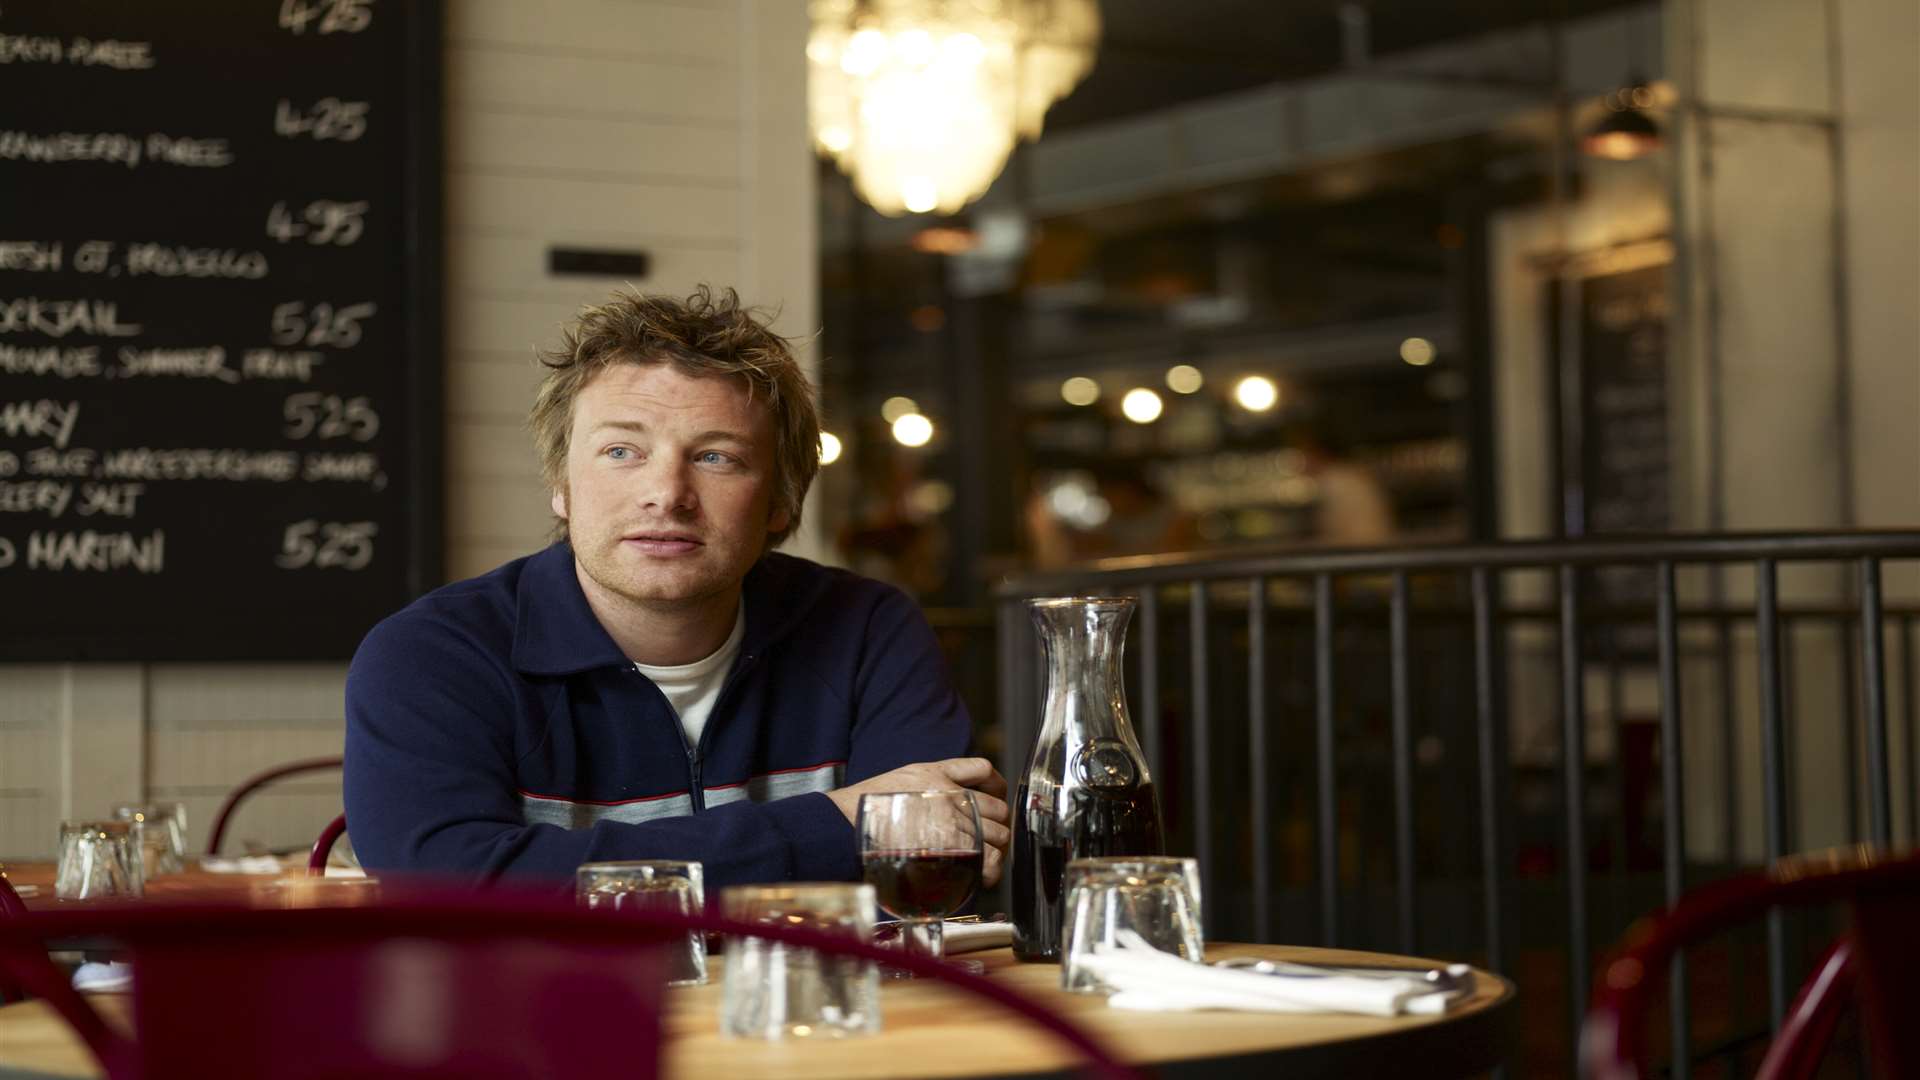 Jamie Oliver, pictured at his Jamie's Italian restaurant in Bluewater, which opened in 2011